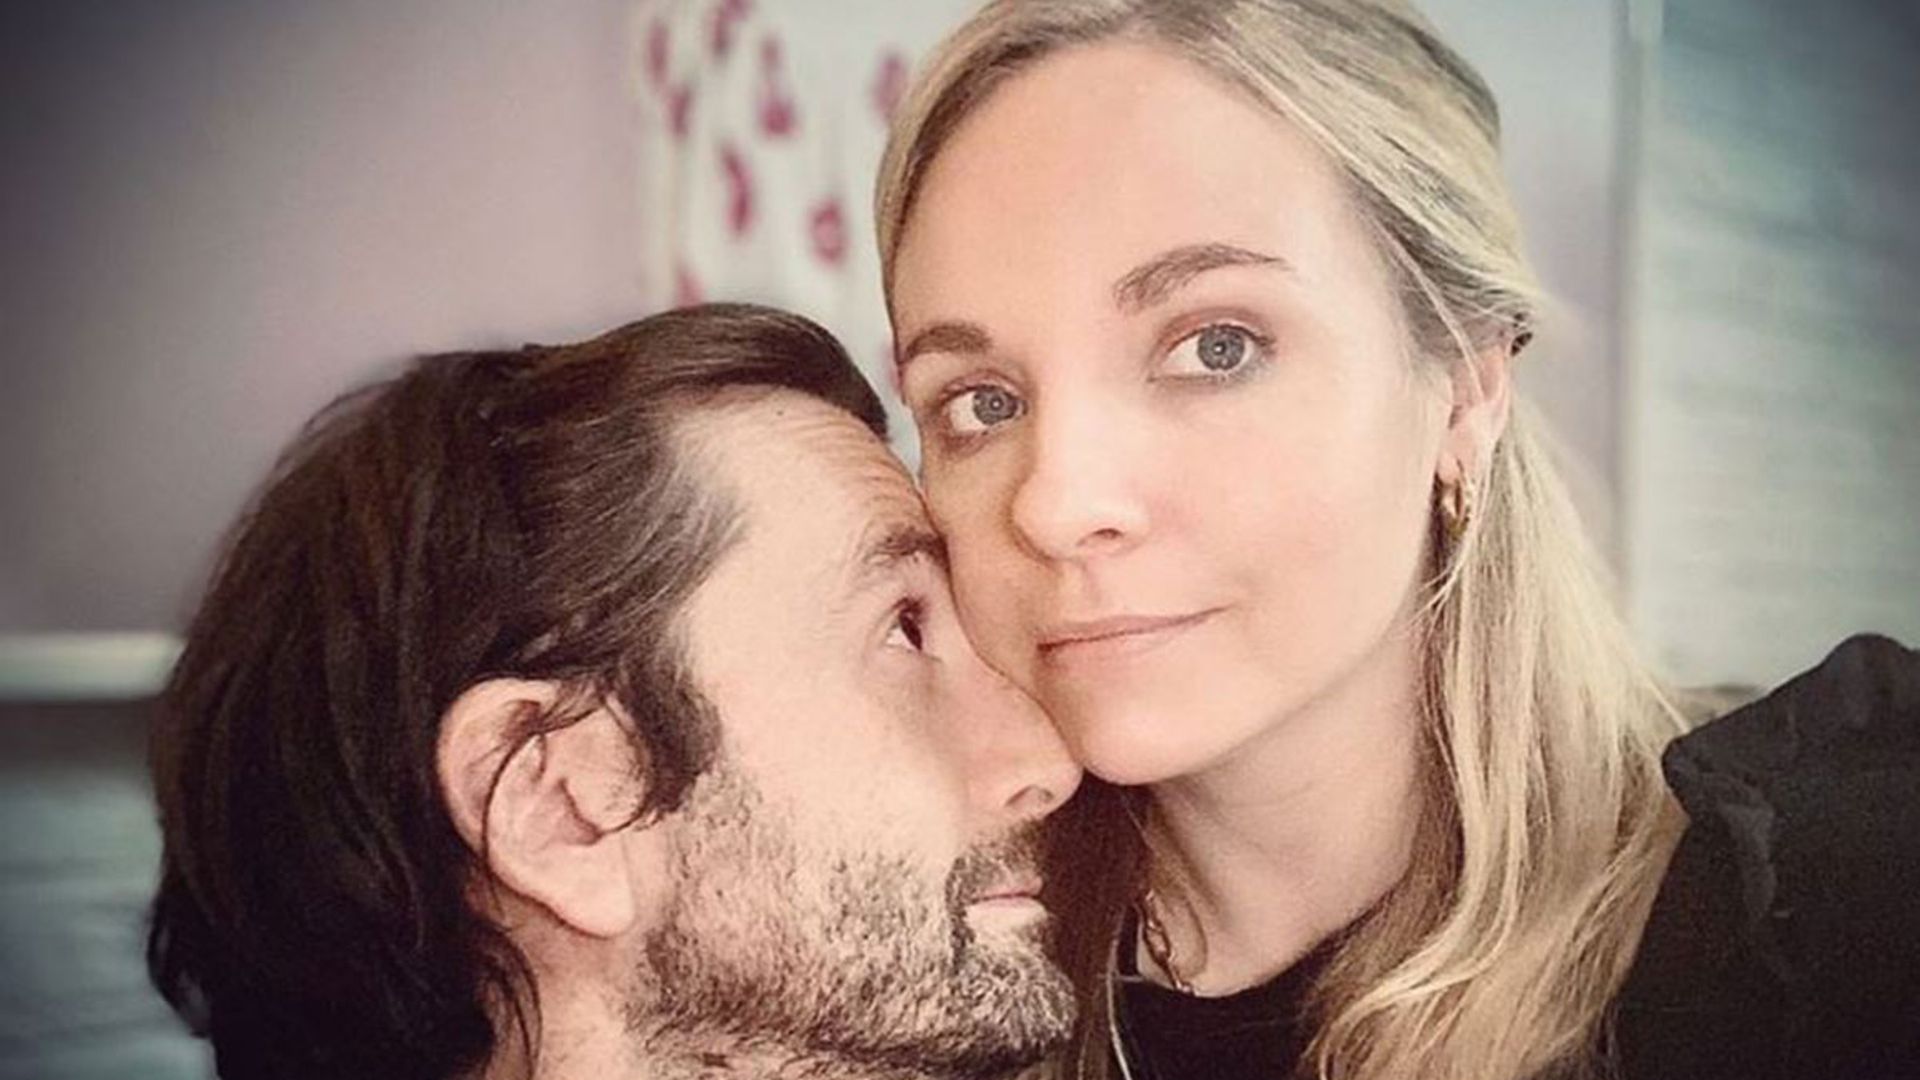 Georgia Tennant reflects on cancer battle as she urges fans not to miss warning signs